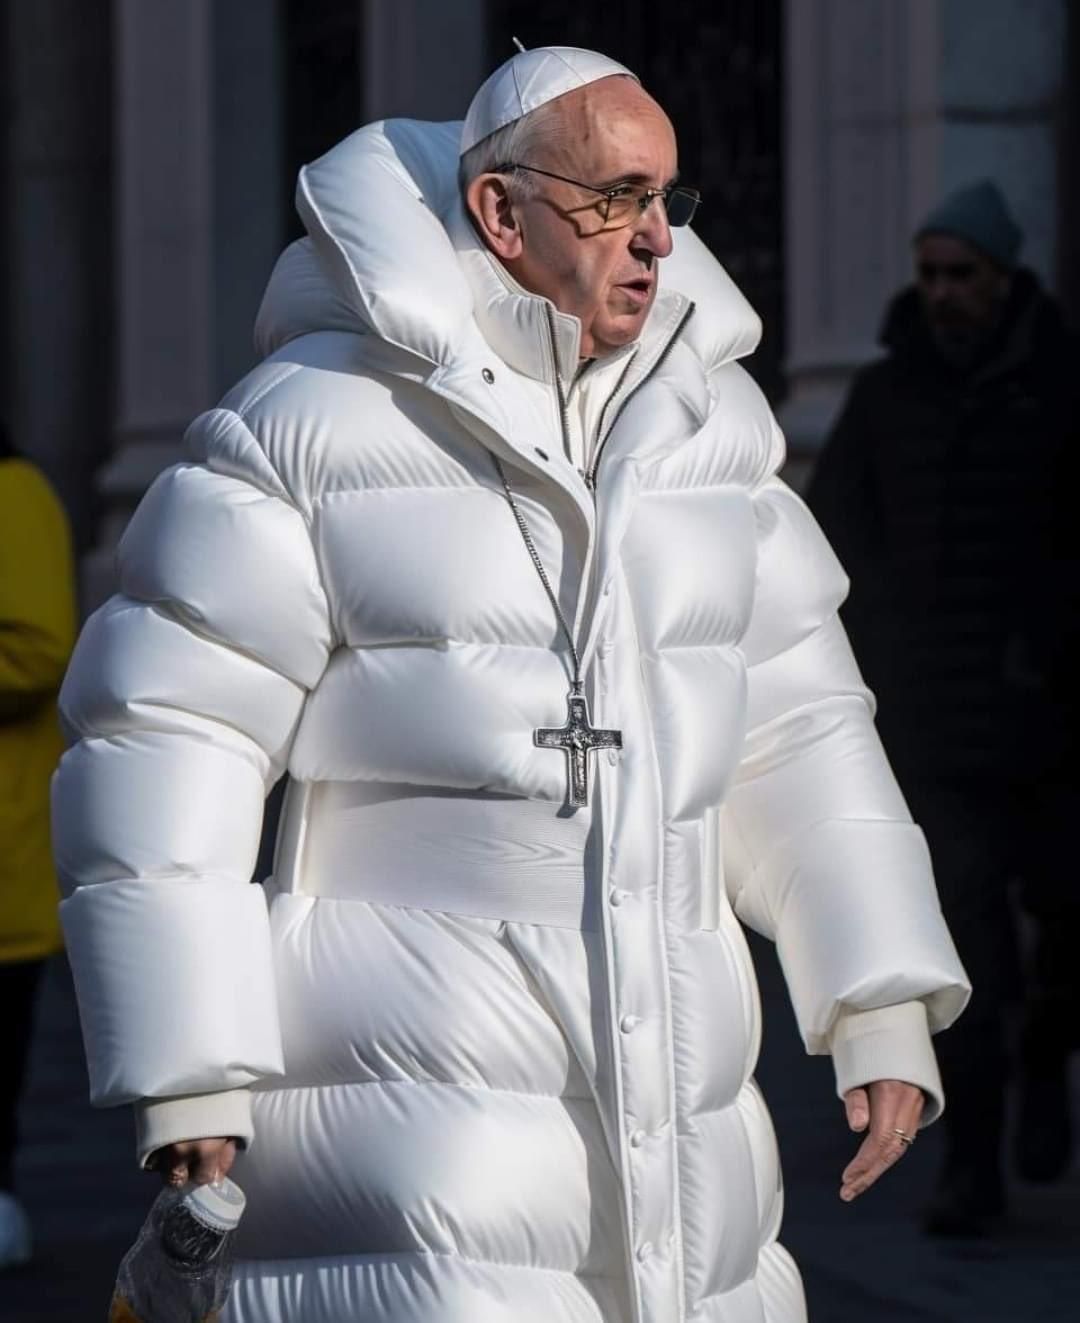 Pope Francis was spotted sporting an all white fashion ensemble